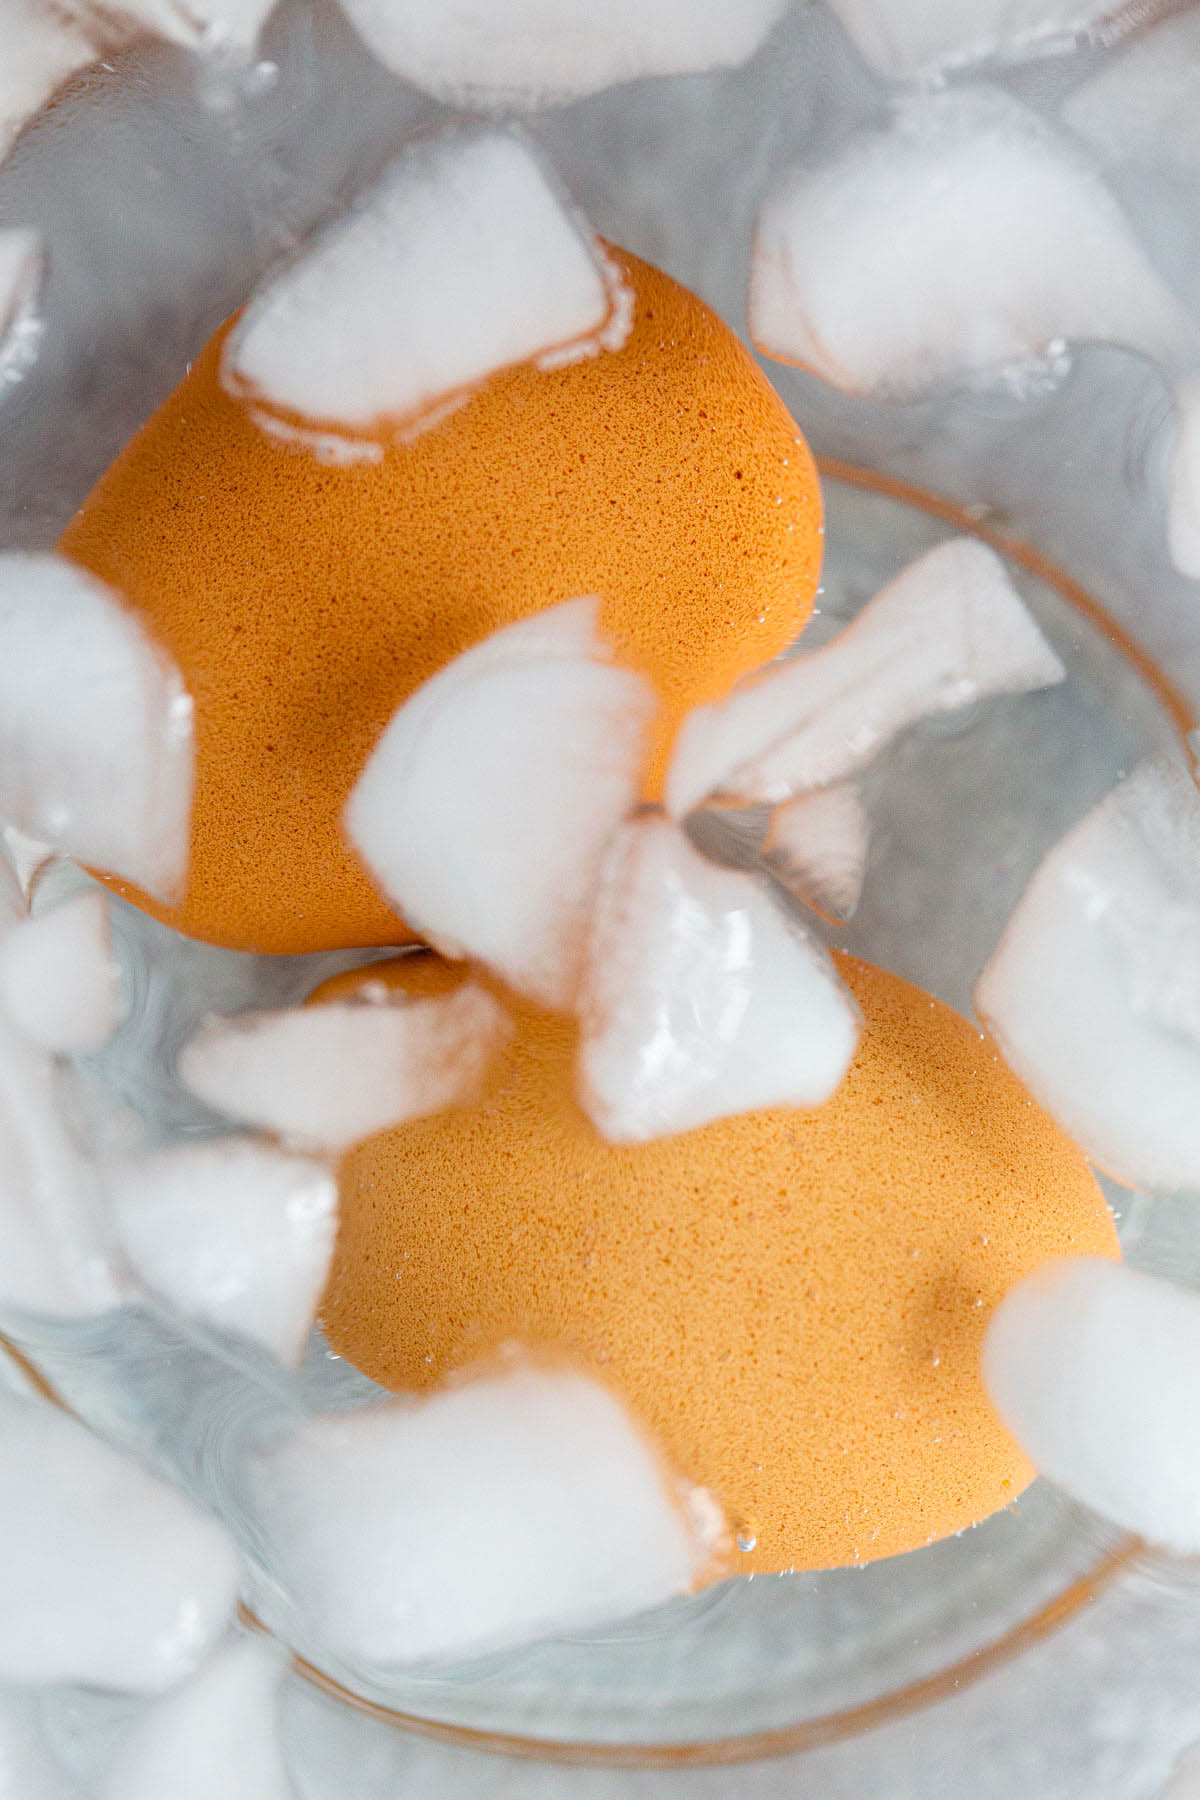 Hard boiled eggs in ice water